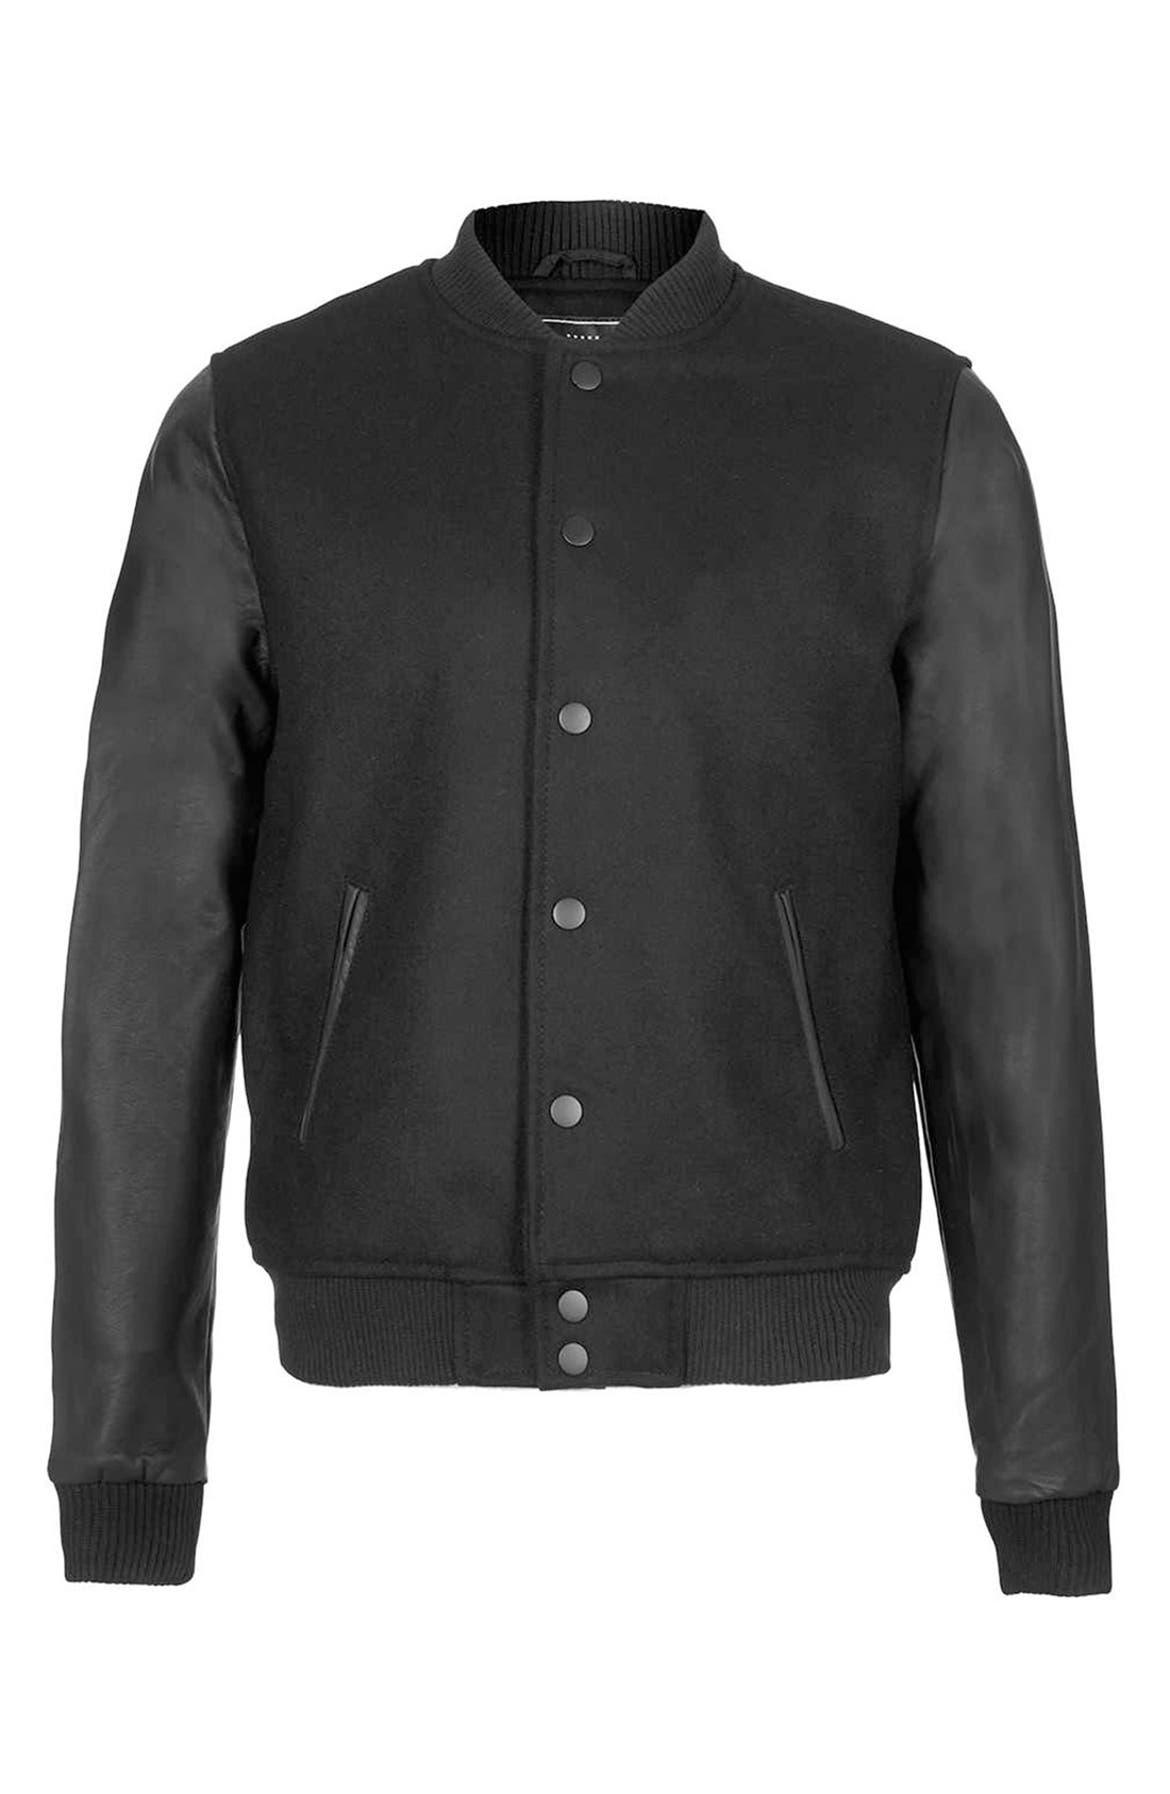 Topman Wool Blend Bomber Jacket with Faux Leather Sleeves | Nordstrom